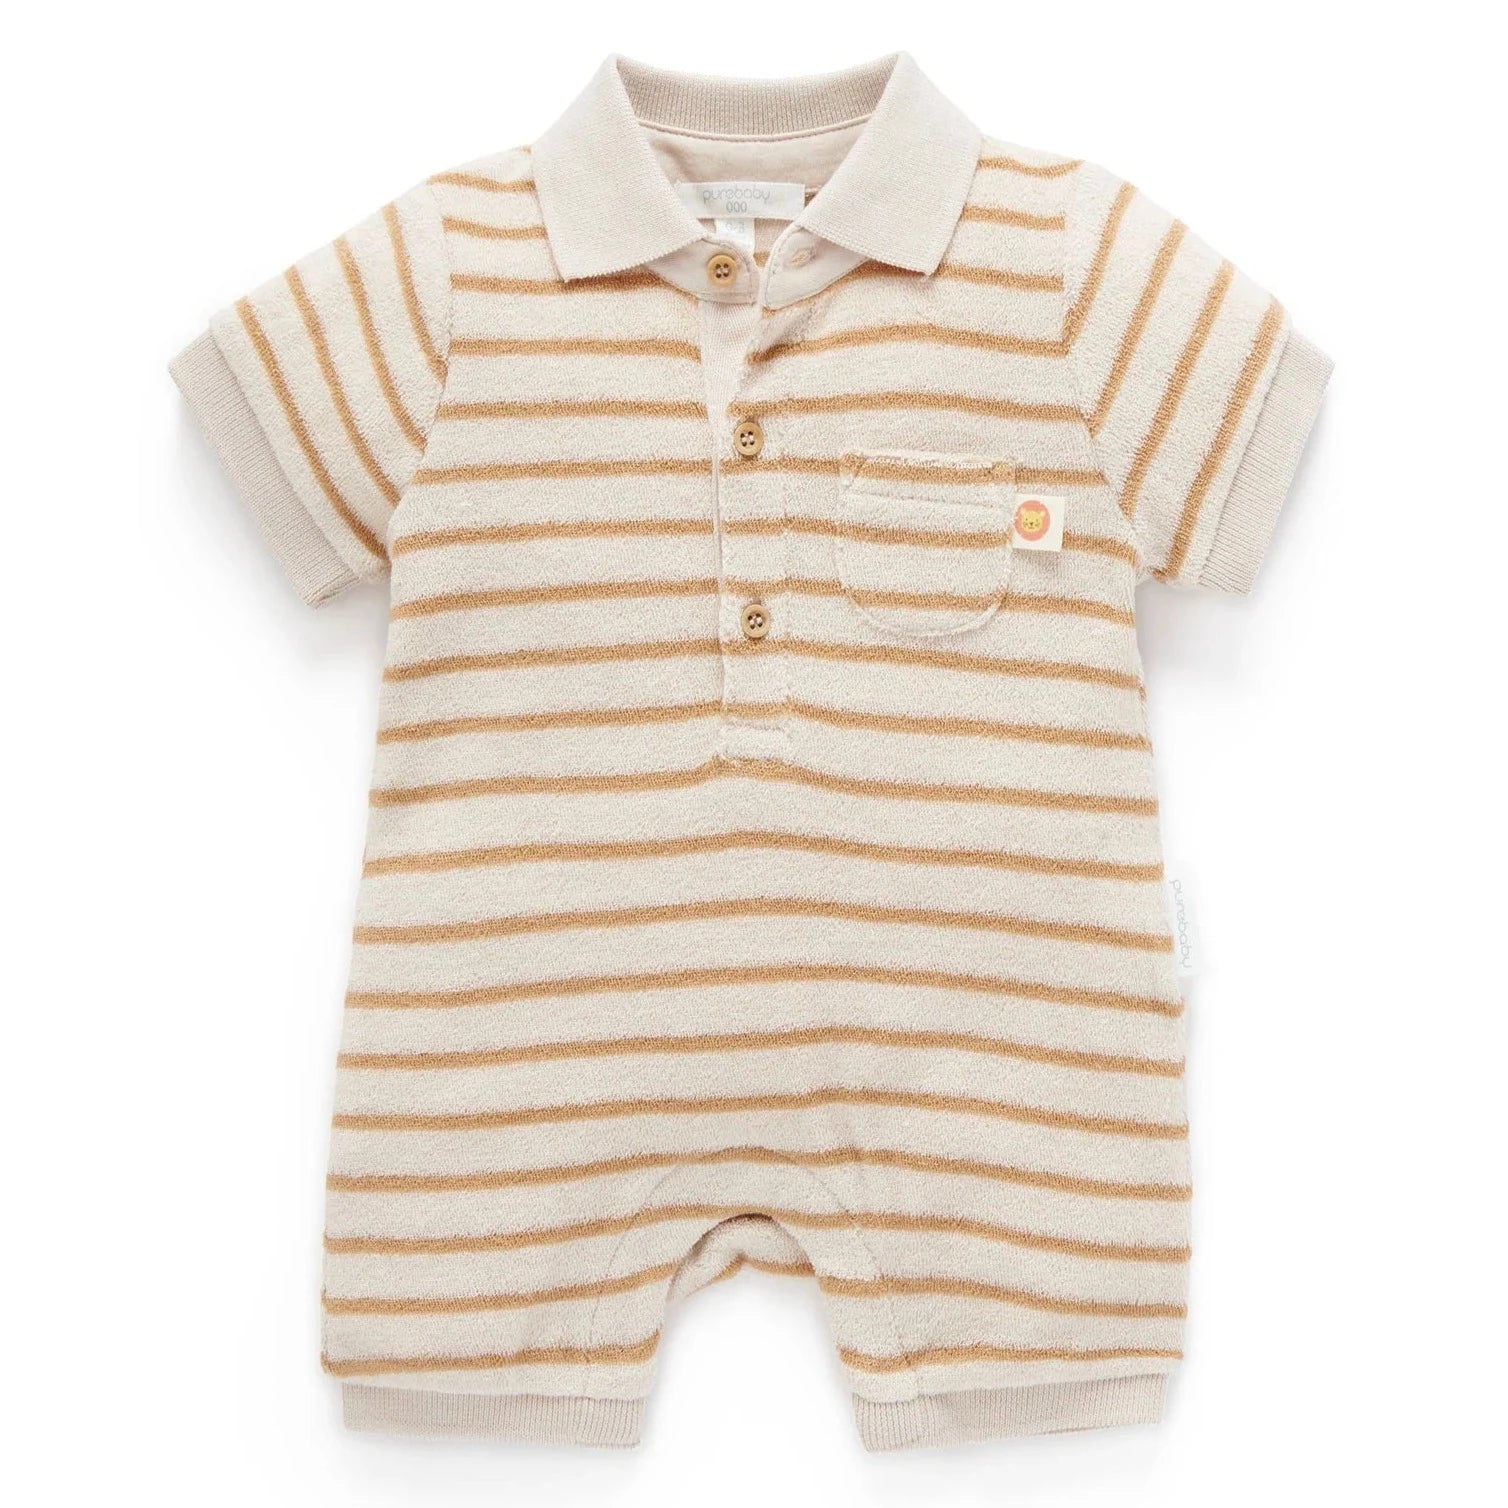 Purebaby romper - angus and dudley